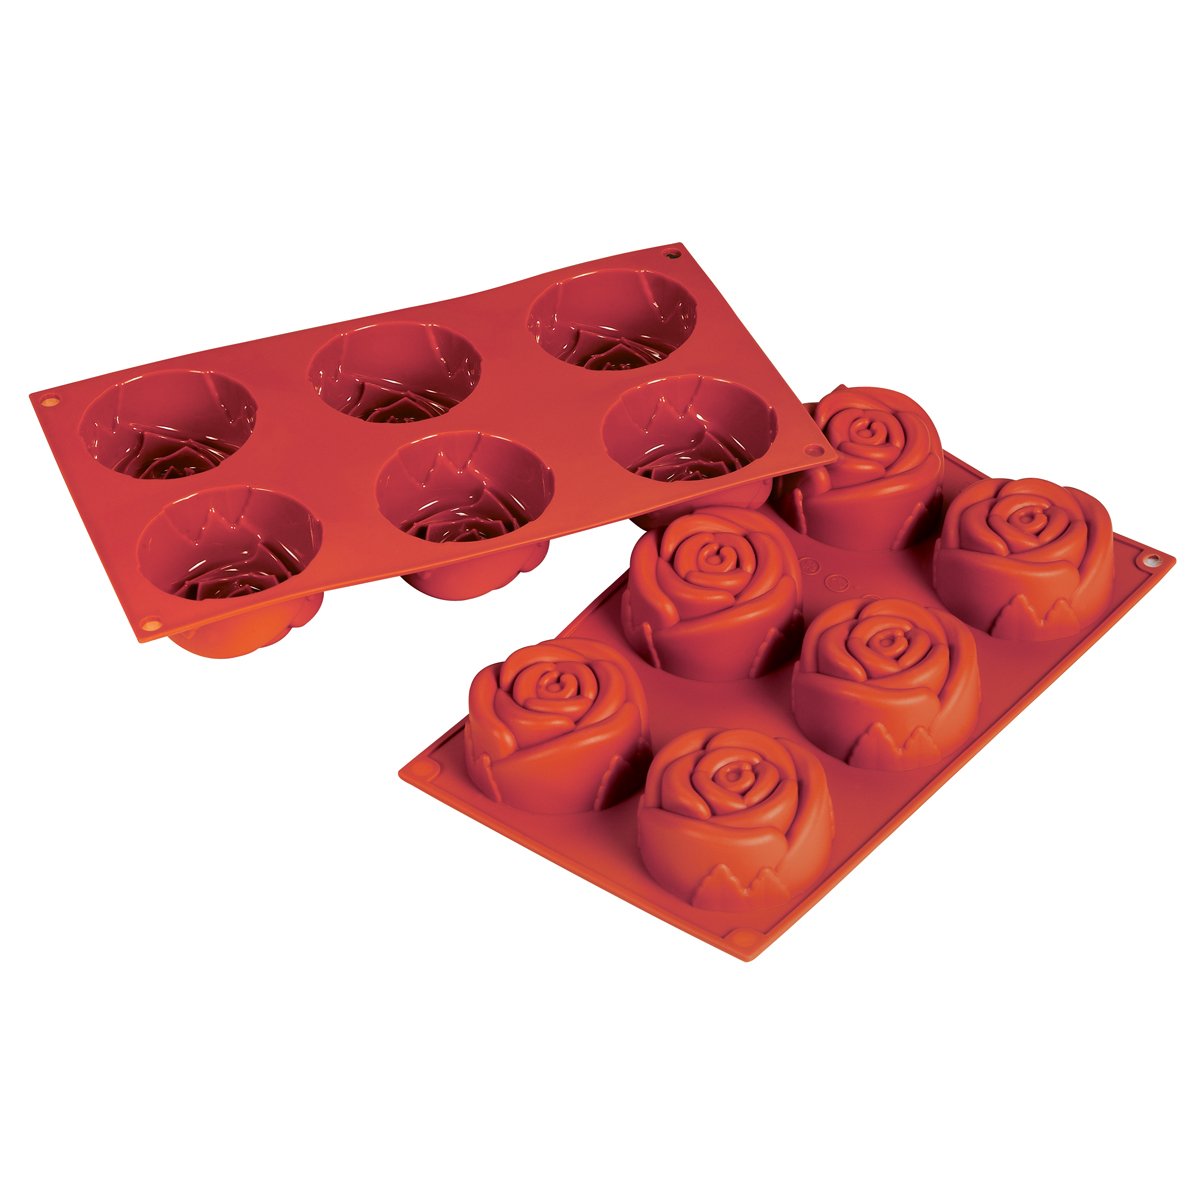 Silicone Molds, Buy Silicone Baking Molds Online